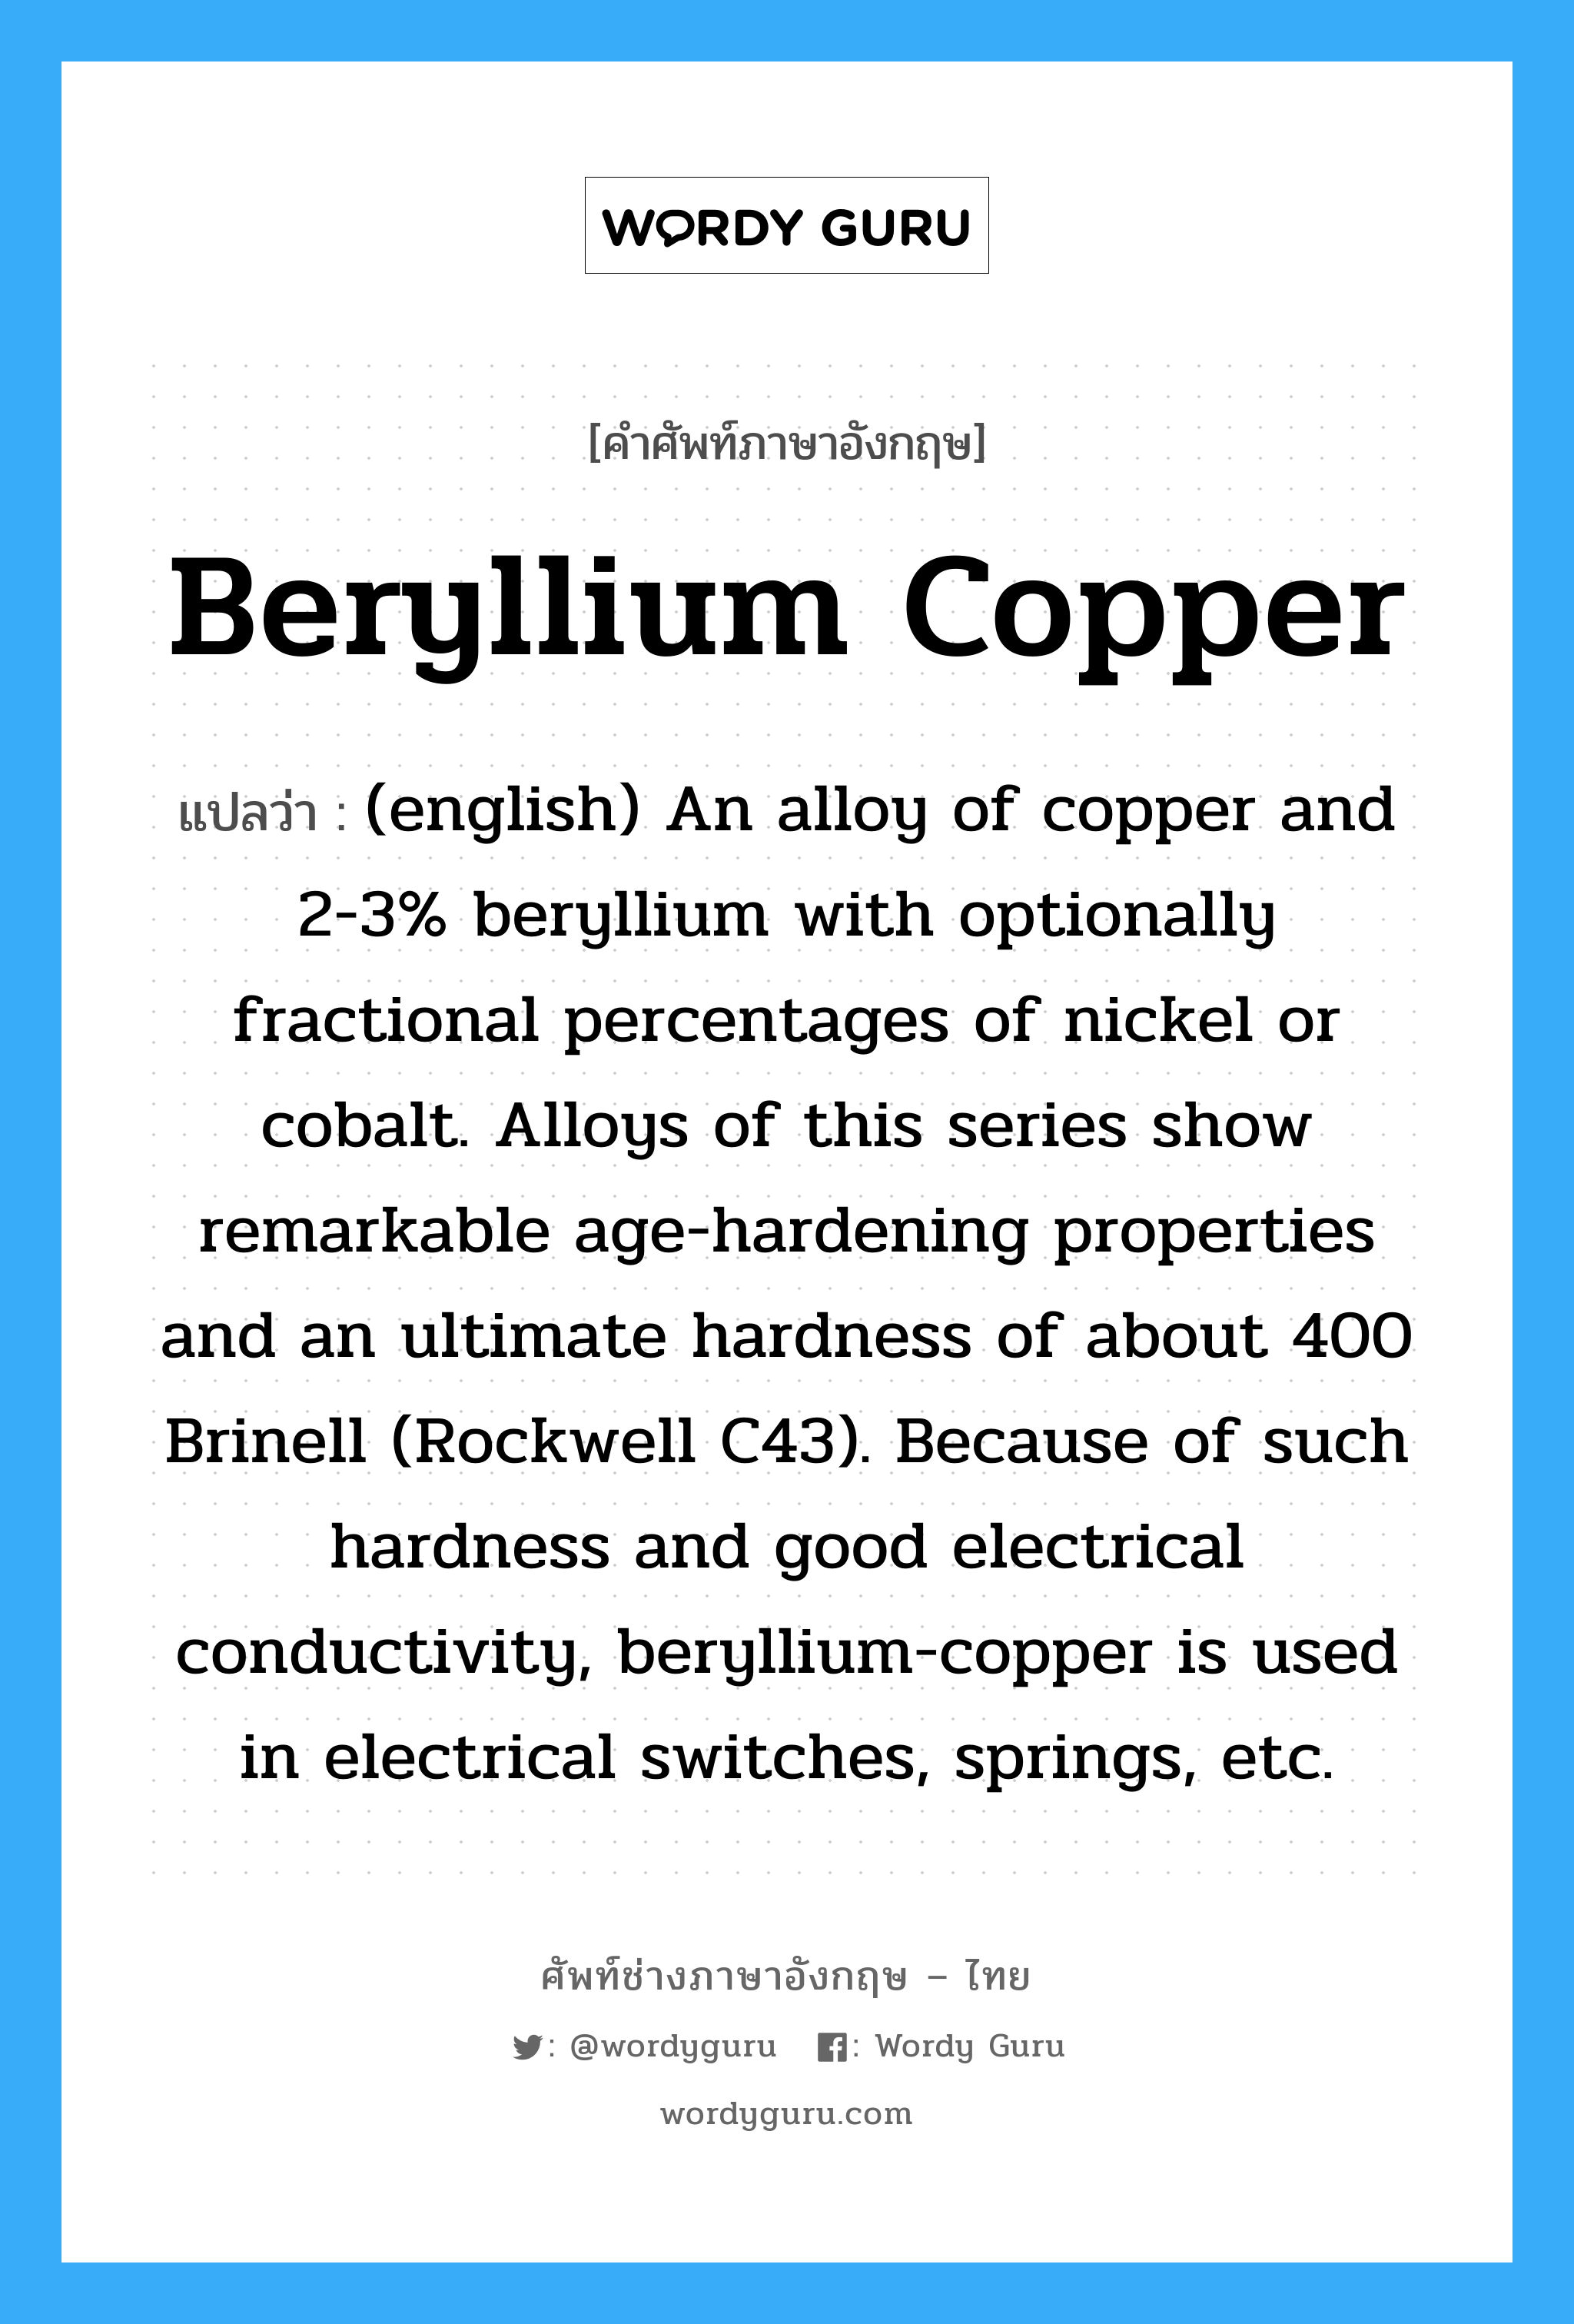 (english) An alloy of copper and 2-3% beryllium with optionally fractional percentages of nickel or cobalt. Alloys of this series show remarkable age-hardening properties and an ultimate hardness of about 400 Brinell (Rockwell C43). Because of such hardness and good electrical conductivity, beryllium-copper is used in electrical switches, springs, etc. ภาษาอังกฤษ?, คำศัพท์ช่างภาษาอังกฤษ - ไทย (english) An alloy of copper and 2-3% beryllium with optionally fractional percentages of nickel or cobalt. Alloys of this series show remarkable age-hardening properties and an ultimate hardness of about 400 Brinell (Rockwell C43). Because of such hardness and good electrical conductivity, beryllium-copper is used in electrical switches, springs, etc. คำศัพท์ภาษาอังกฤษ (english) An alloy of copper and 2-3% beryllium with optionally fractional percentages of nickel or cobalt. Alloys of this series show remarkable age-hardening properties and an ultimate hardness of about 400 Brinell (Rockwell C43). Because of such hardness and good electrical conductivity, beryllium-copper is used in electrical switches, springs, etc. แปลว่า Beryllium Copper